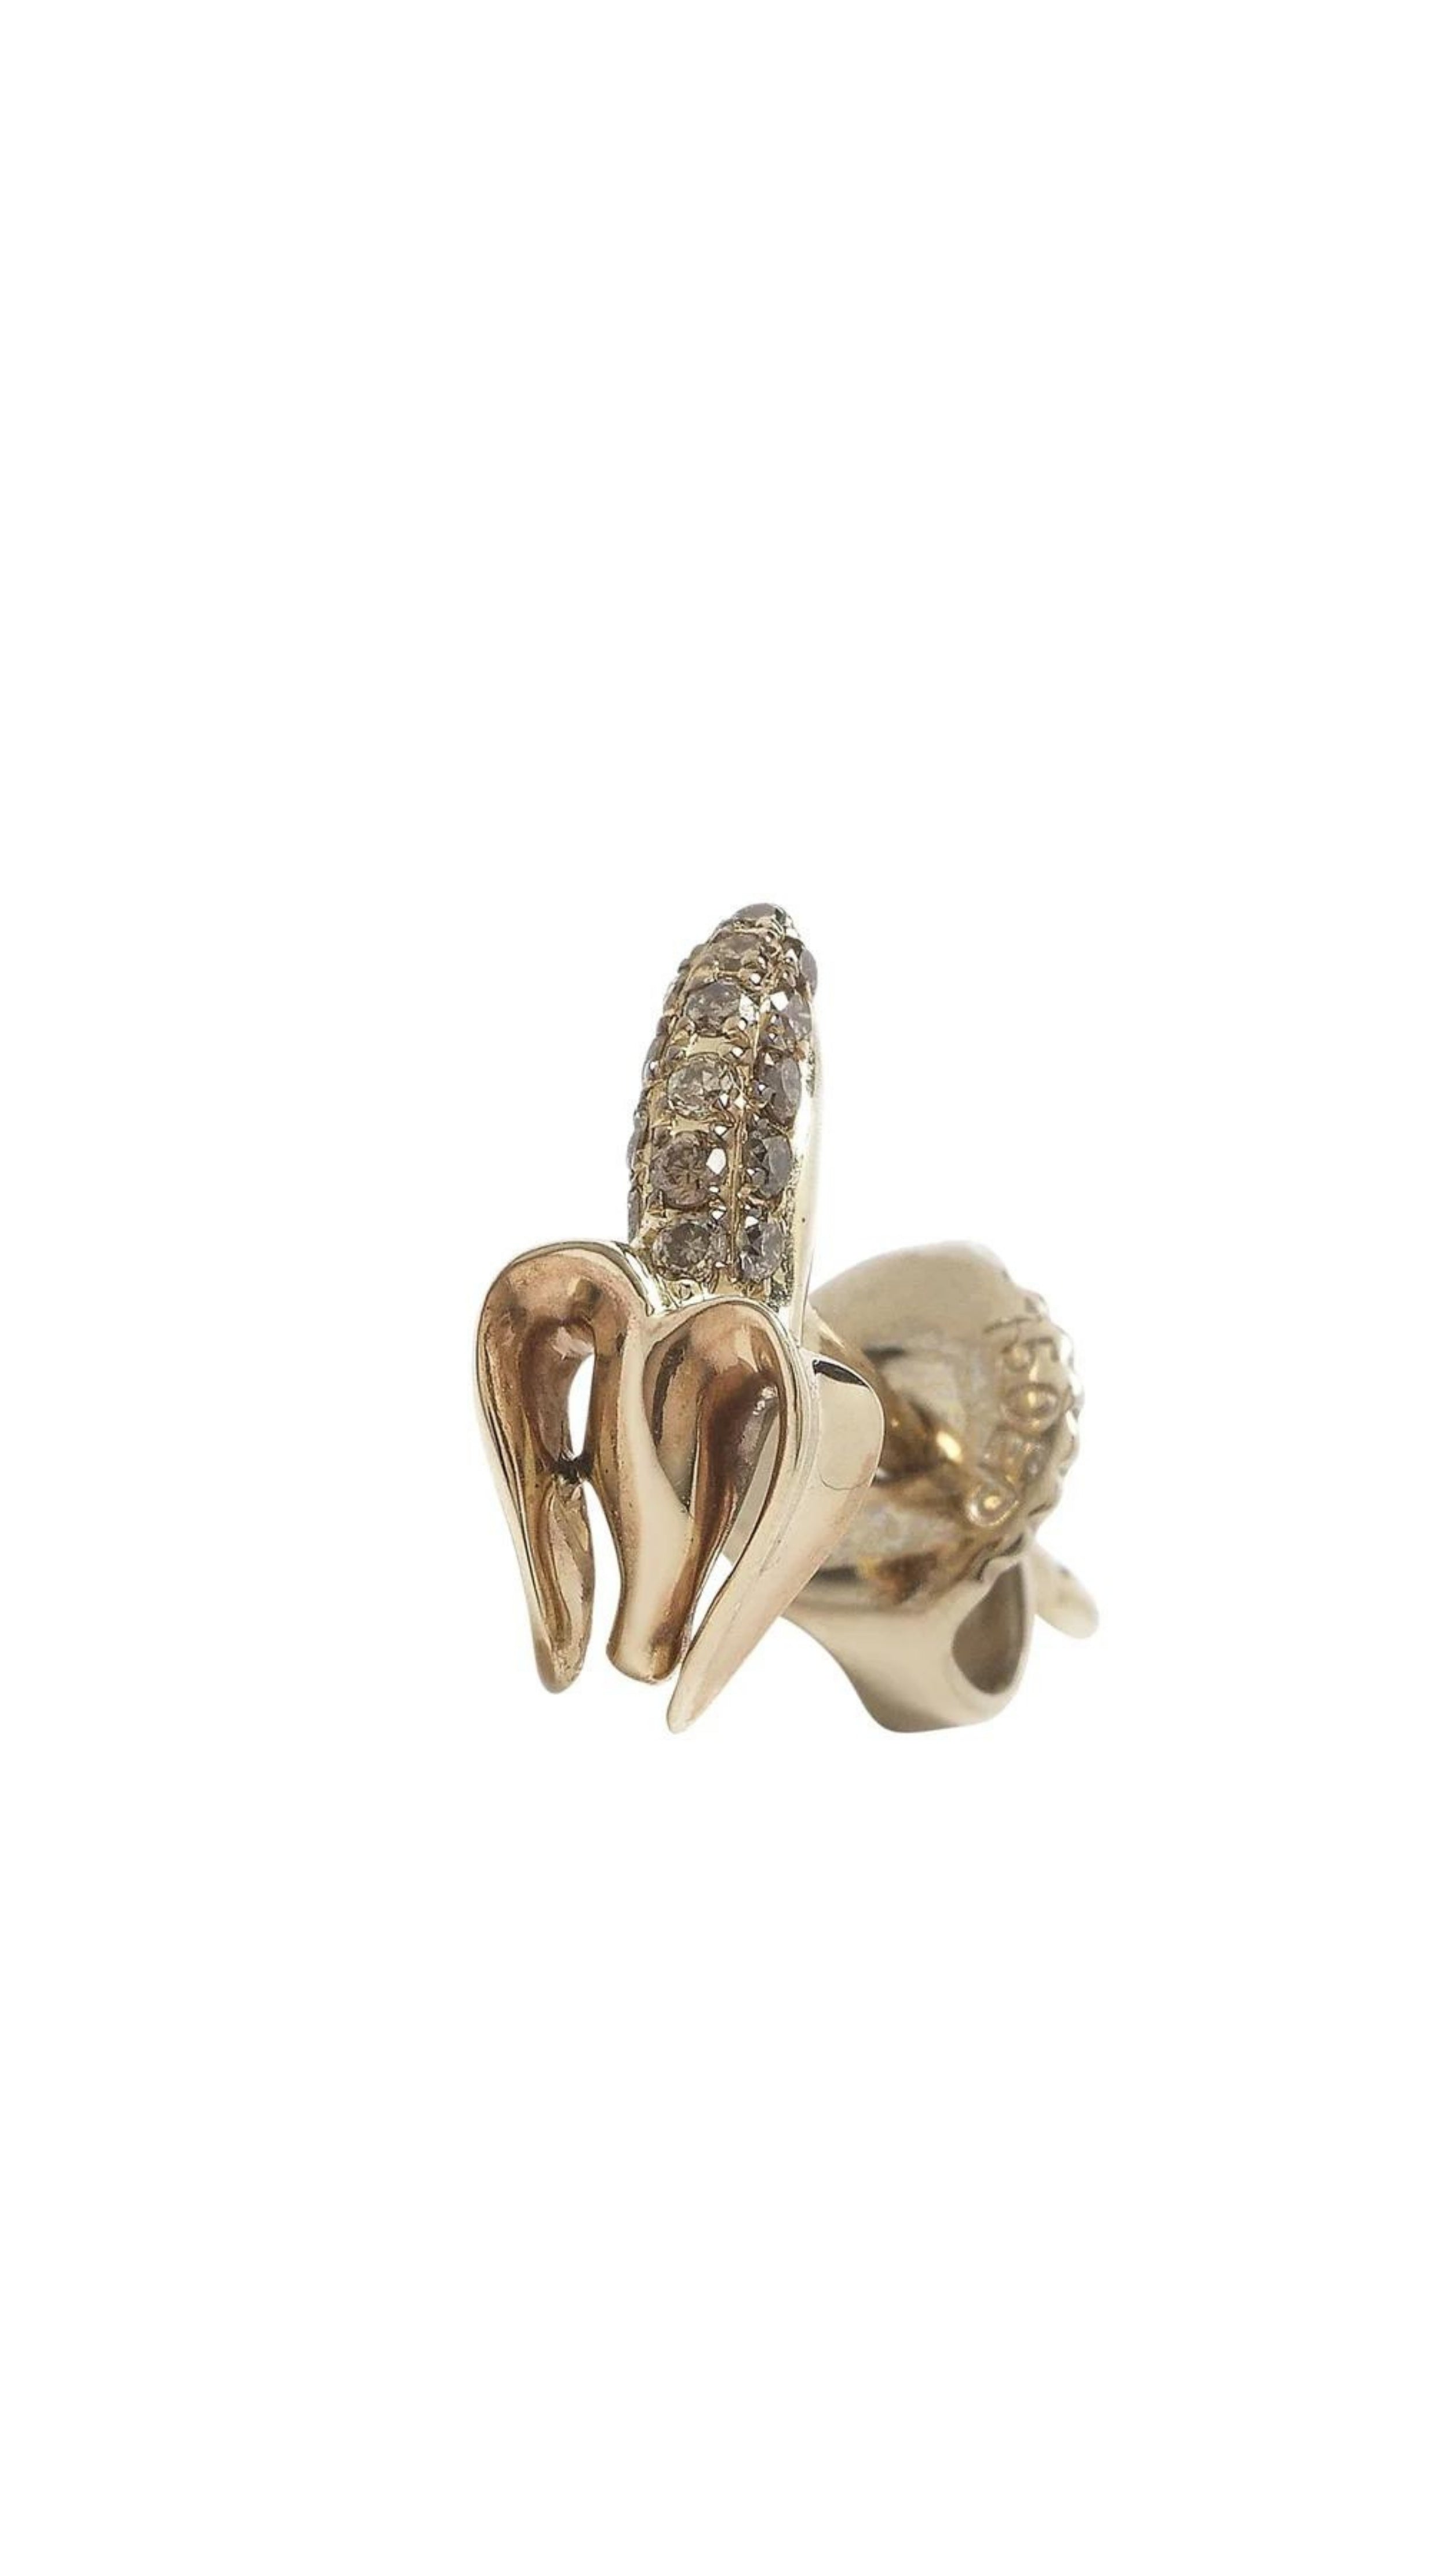 Bibi van der Velden Monkey Mini Banana Stud in Diamond. Single stud earring crafted in the shape of a partially peeled banana. The peel is made from 18K gold and the banana is pave with diamonds. Stud. Photo shows earring from the front and side angle.